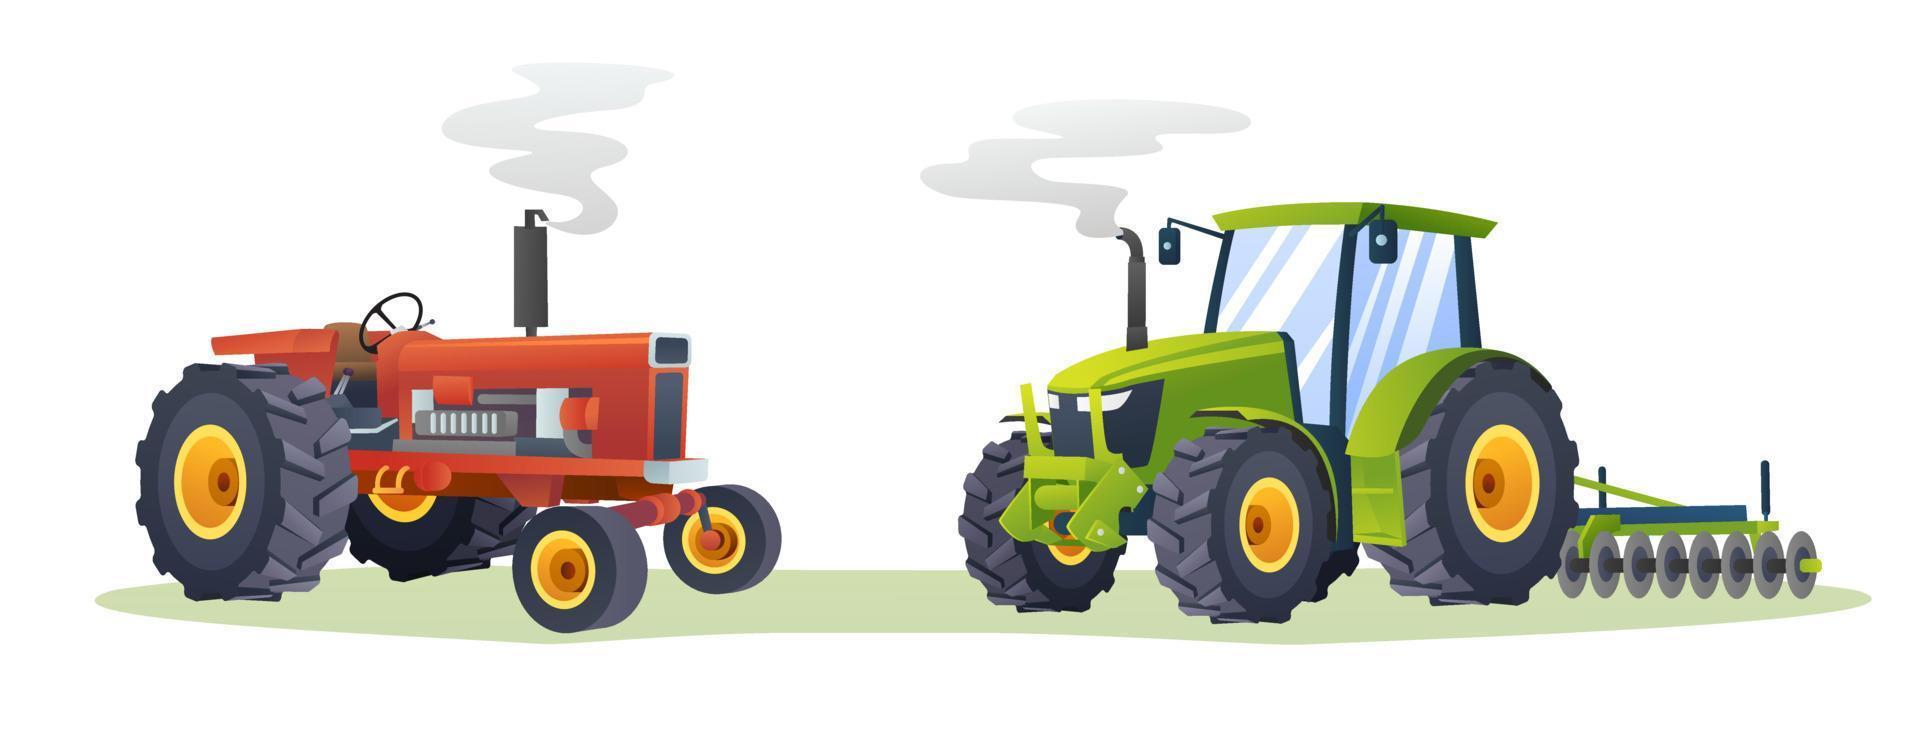 Farm tractors collection isolated illustration vector